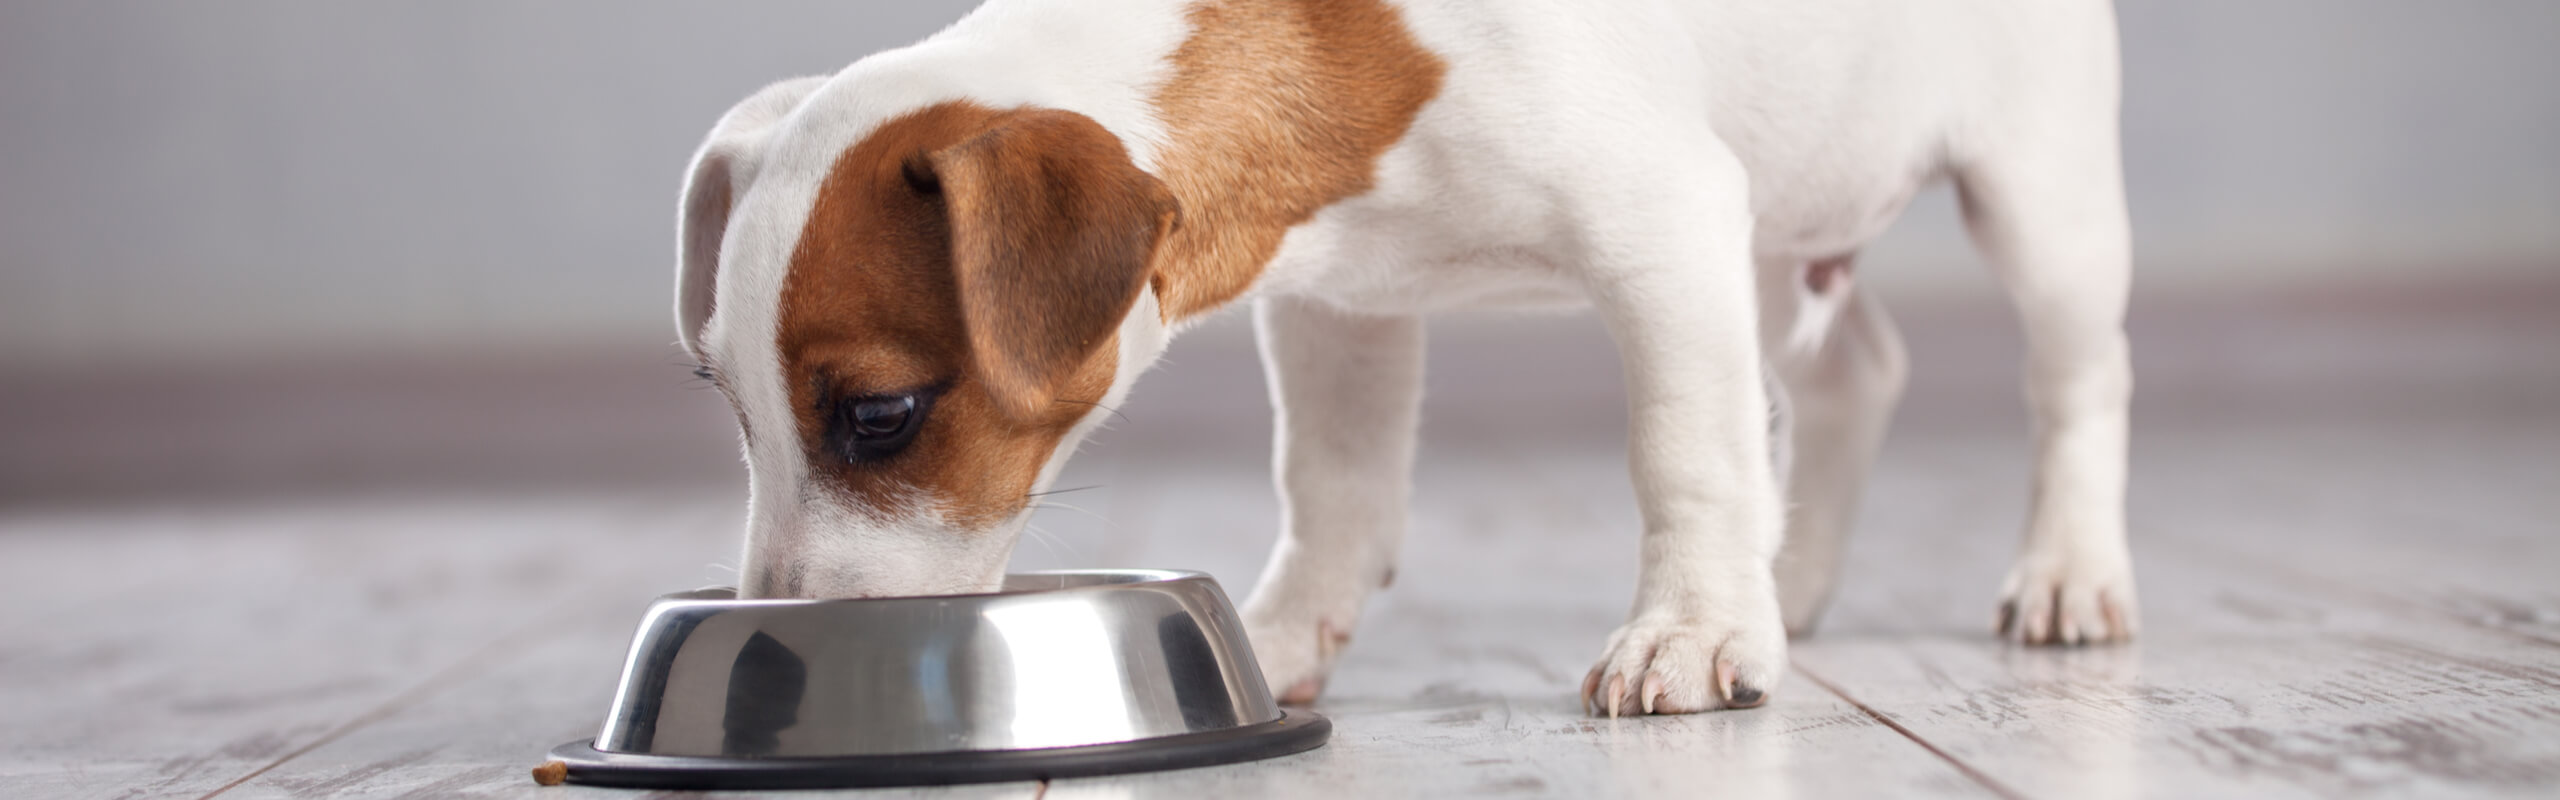 Proactive Nutrition for Dogs - Veterinary Care - WholisticMatters